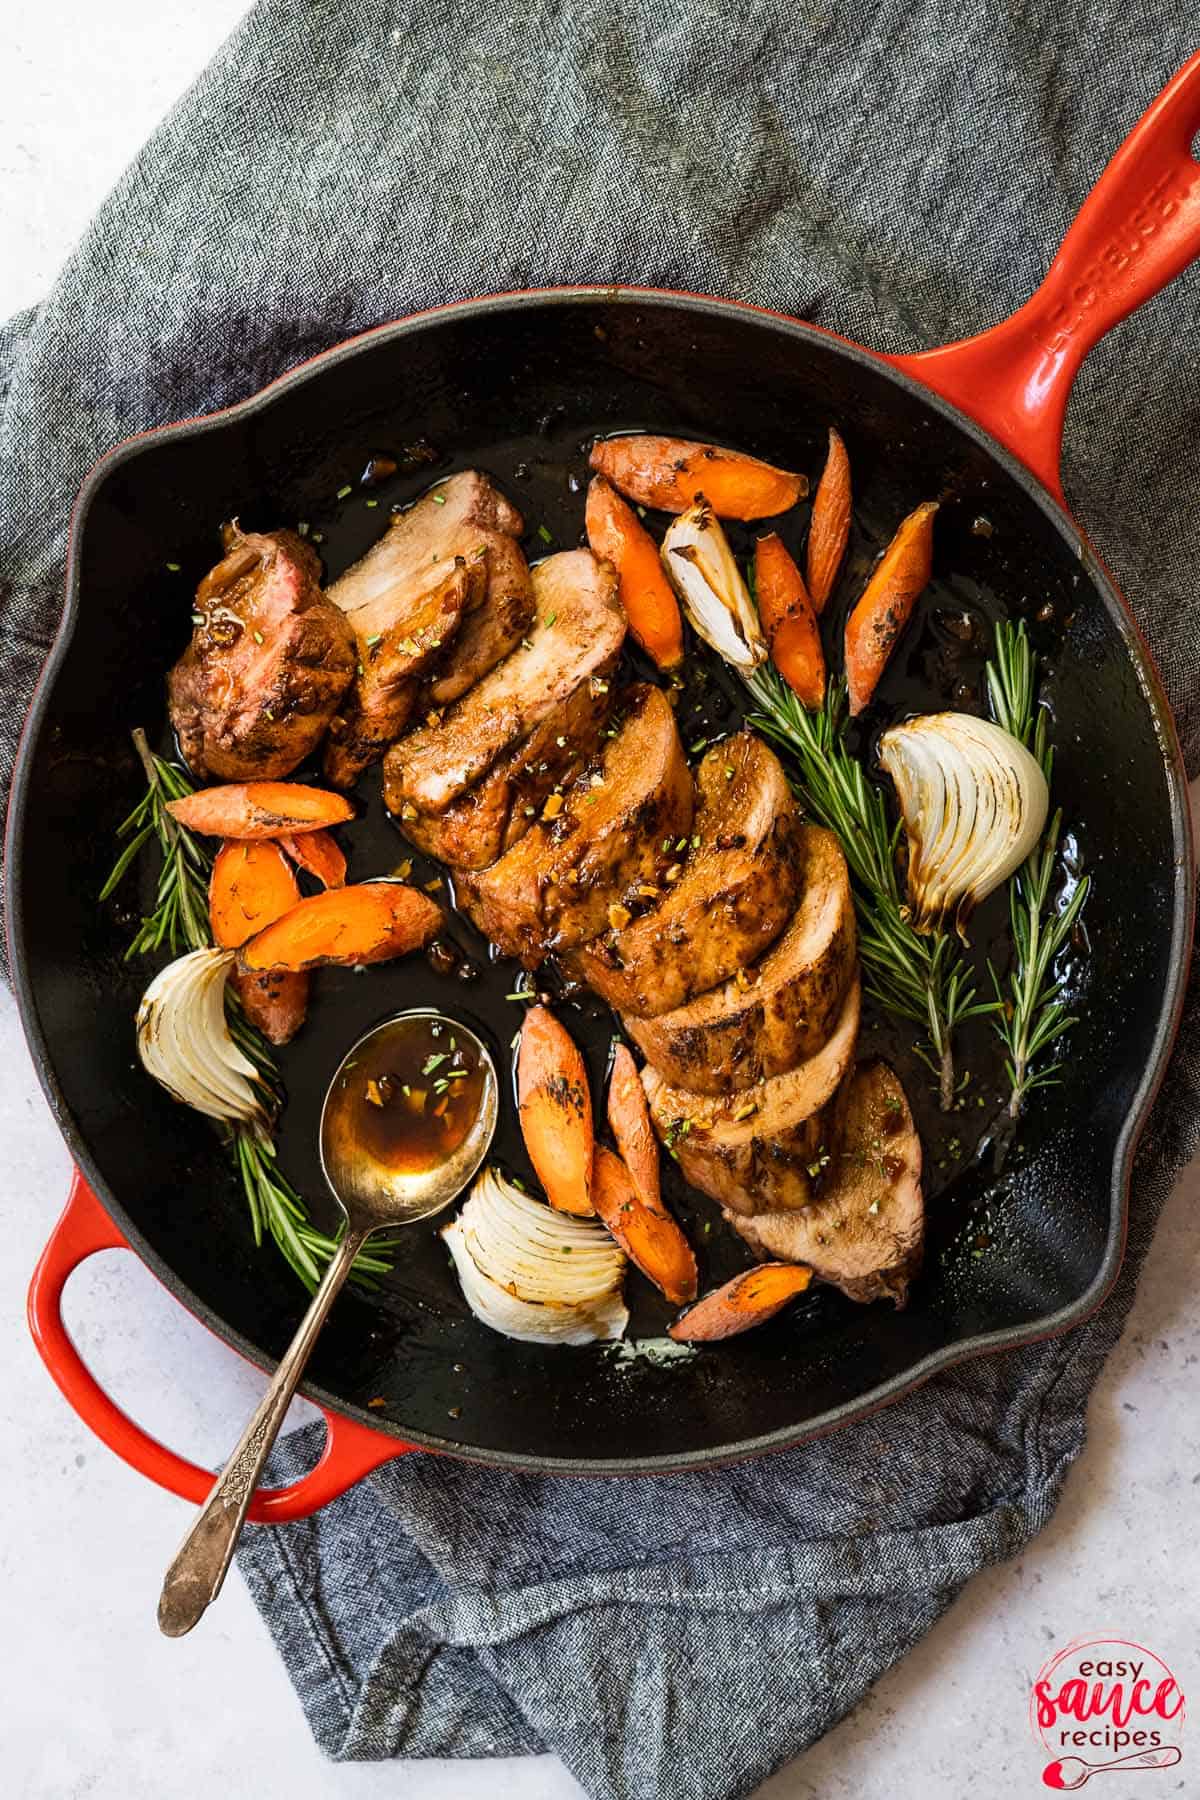 a skillet filled with onions, carrots, and pork tenderloin all glazed in honey garlic sauce